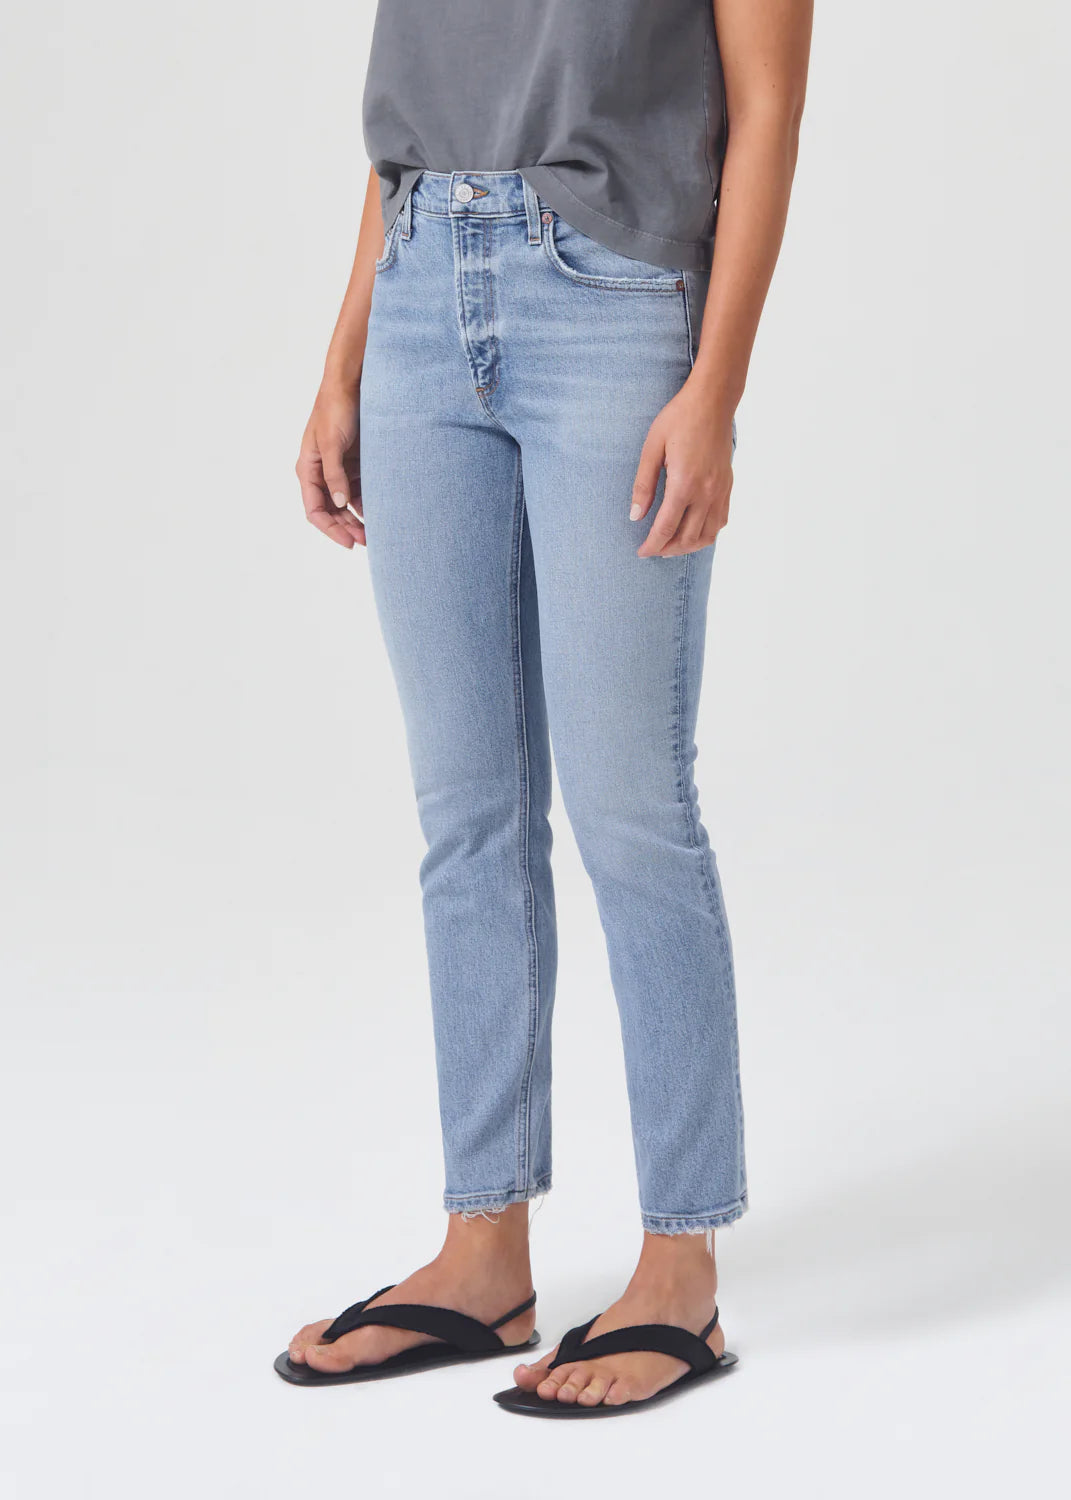 Willow Mid Rise Slim Jean in Torch